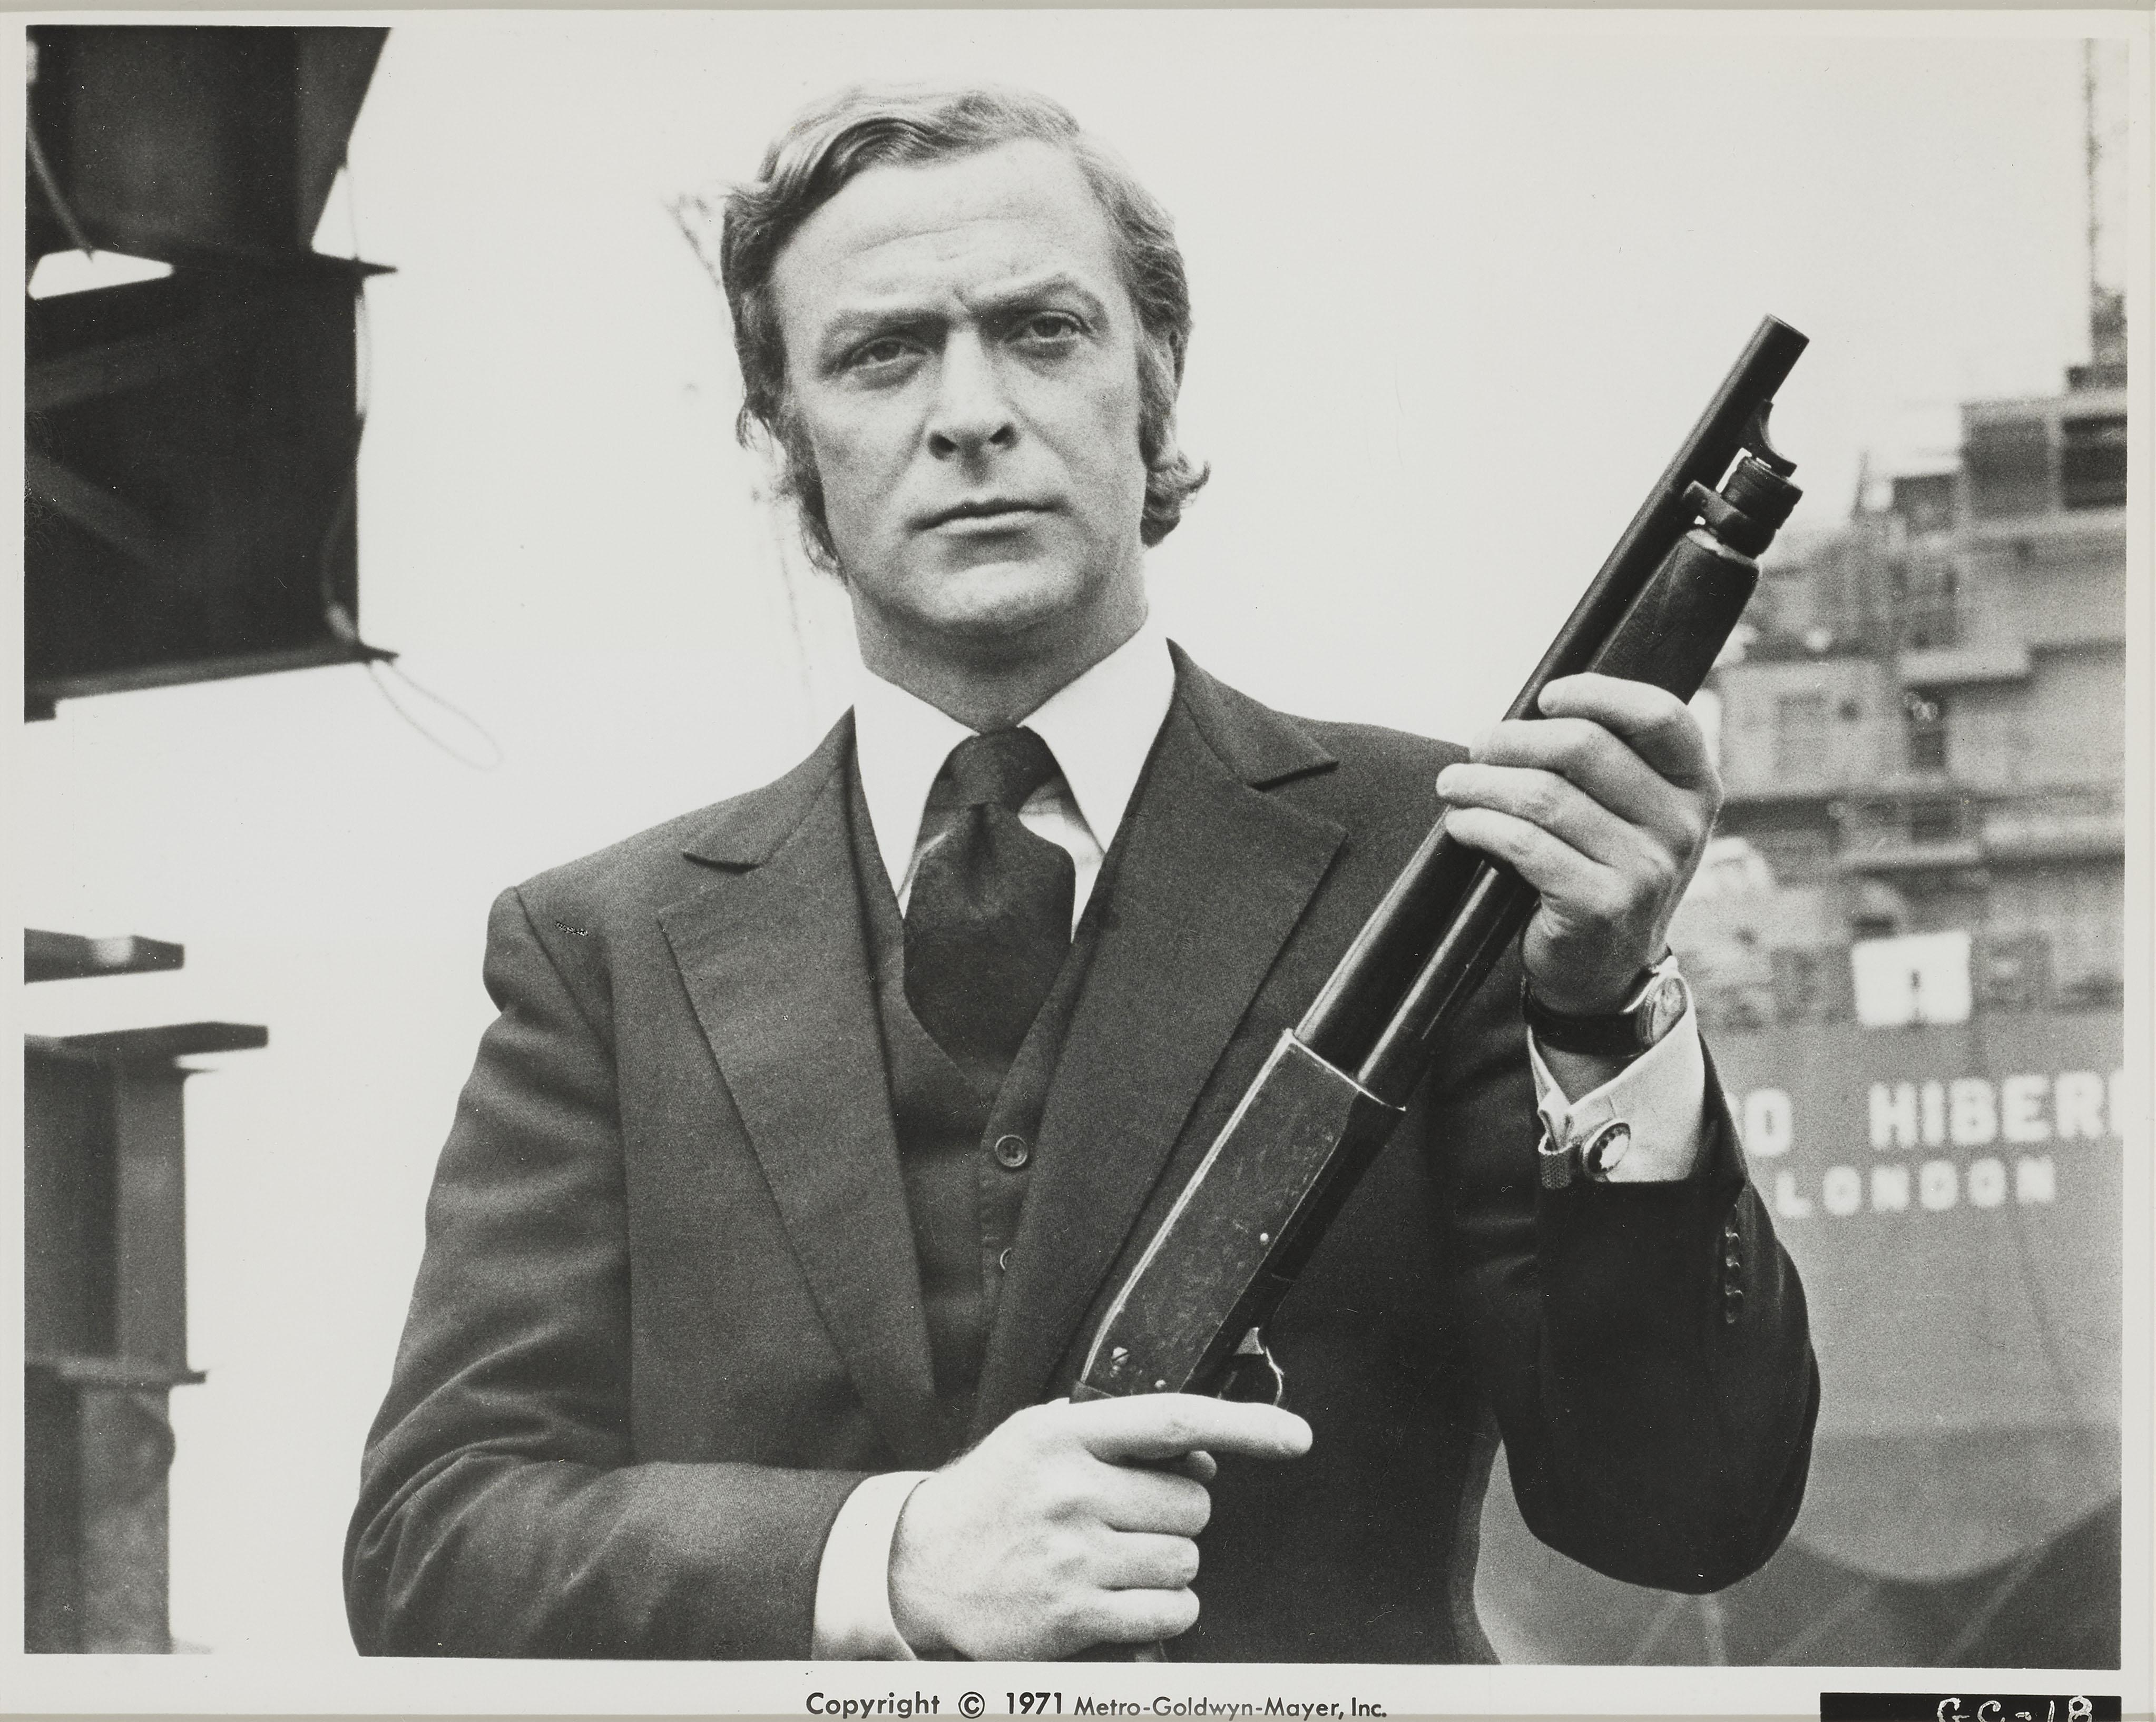 Original US production still for Michael Caine's Classic, 1971 gangster thriller.
Directed by Mike Hodges. This is one of the best images from the film. 
The piece is conservation framed with UV plexiglass in a Tulip wood frame with acid free card